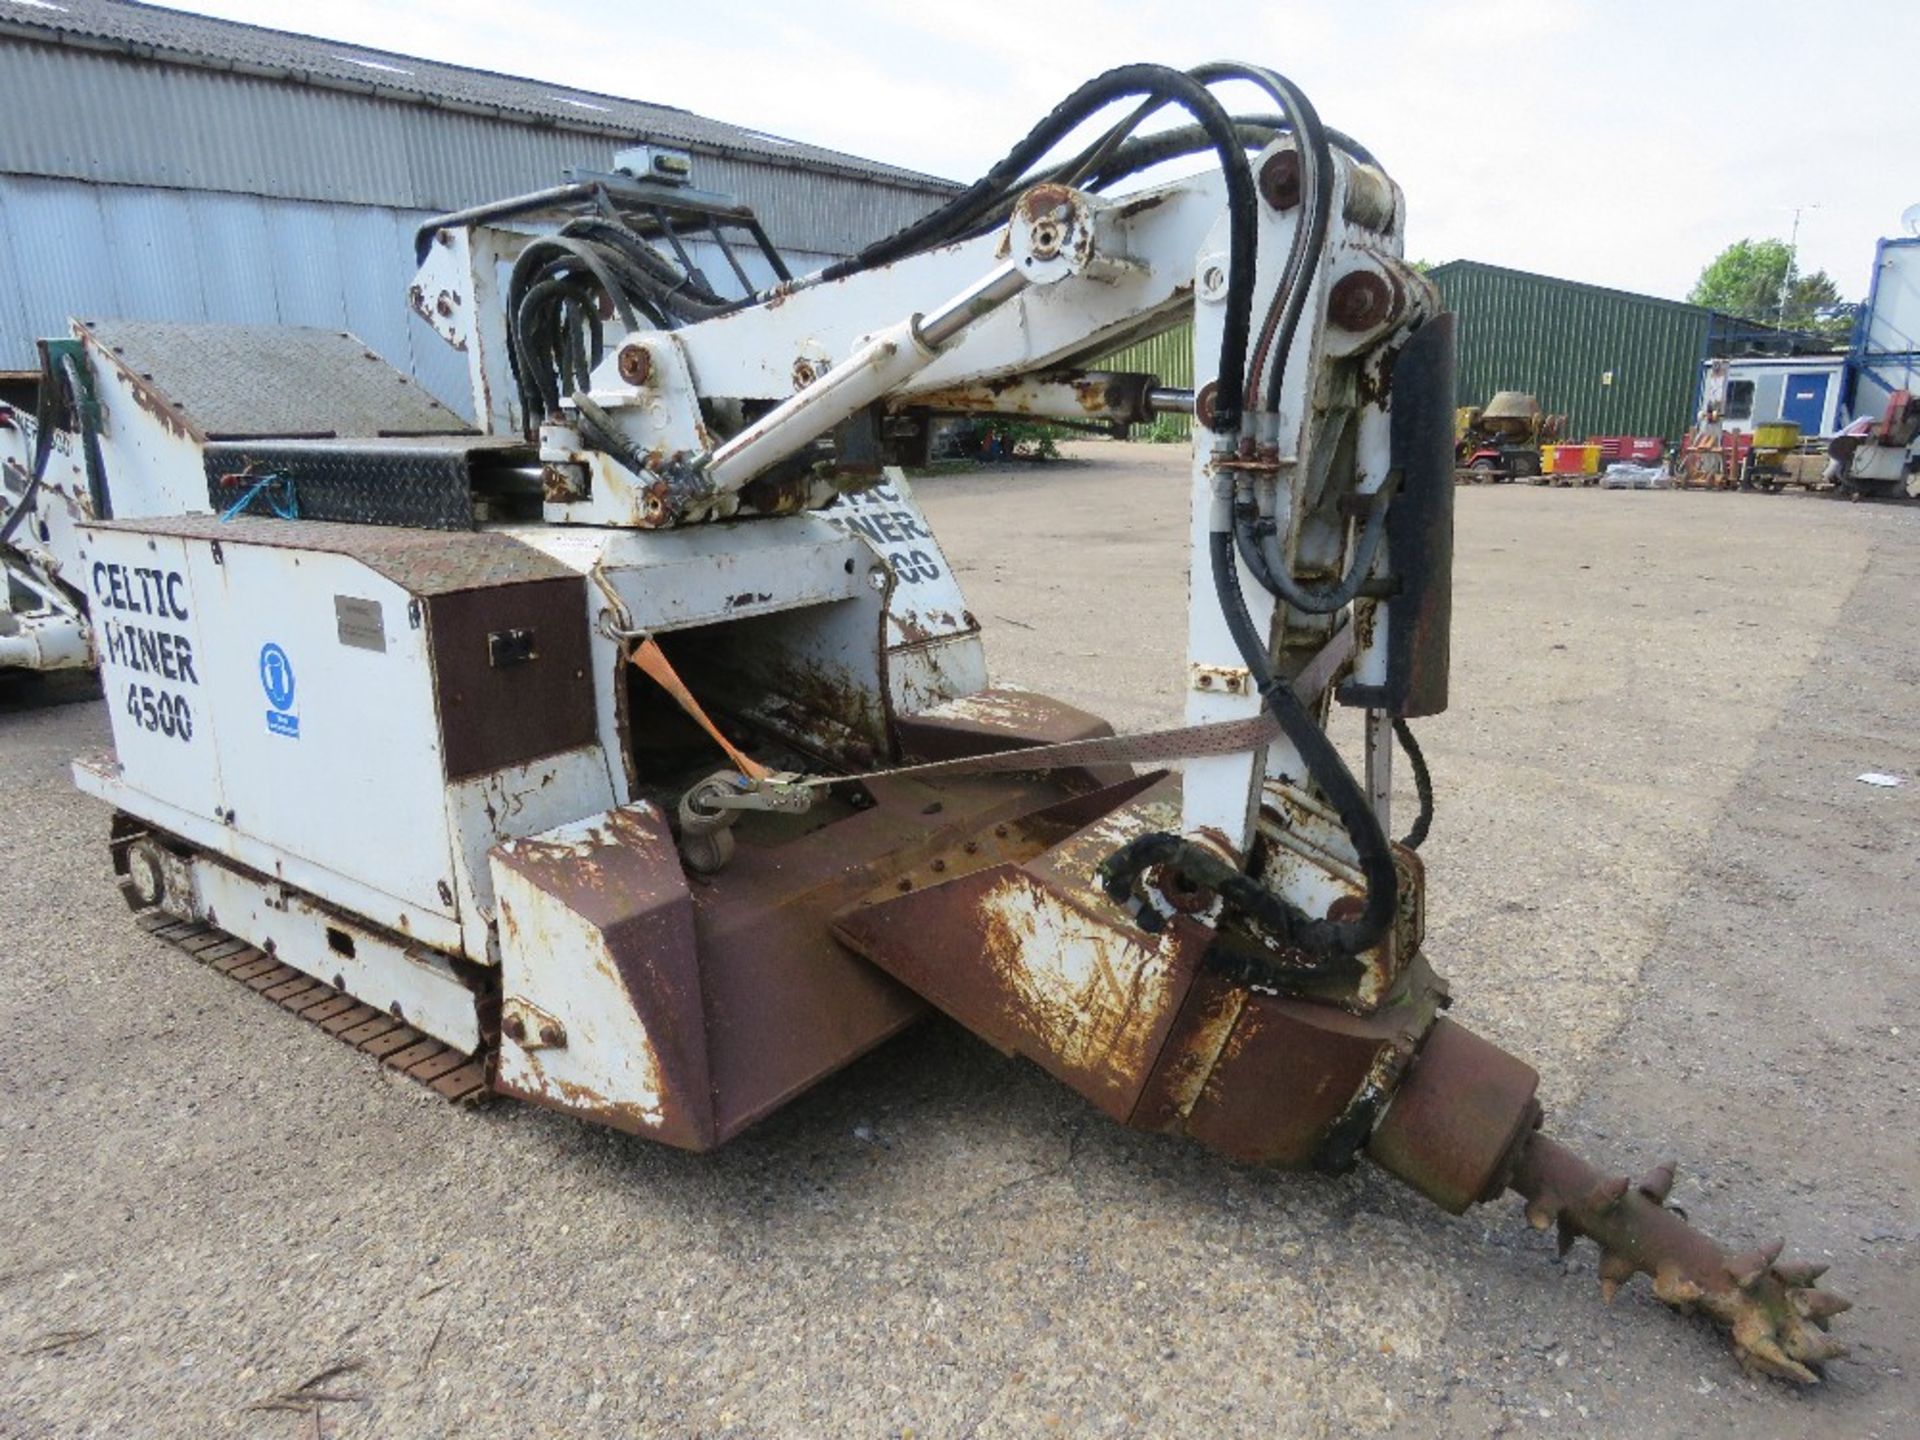 CELTIC MINOR 4500 MK1 ROADHEADER TUNNEL MINING EXCAVATOR MACHINE MANUFACTURED BY METAL INNOVATIONS L - Image 3 of 25